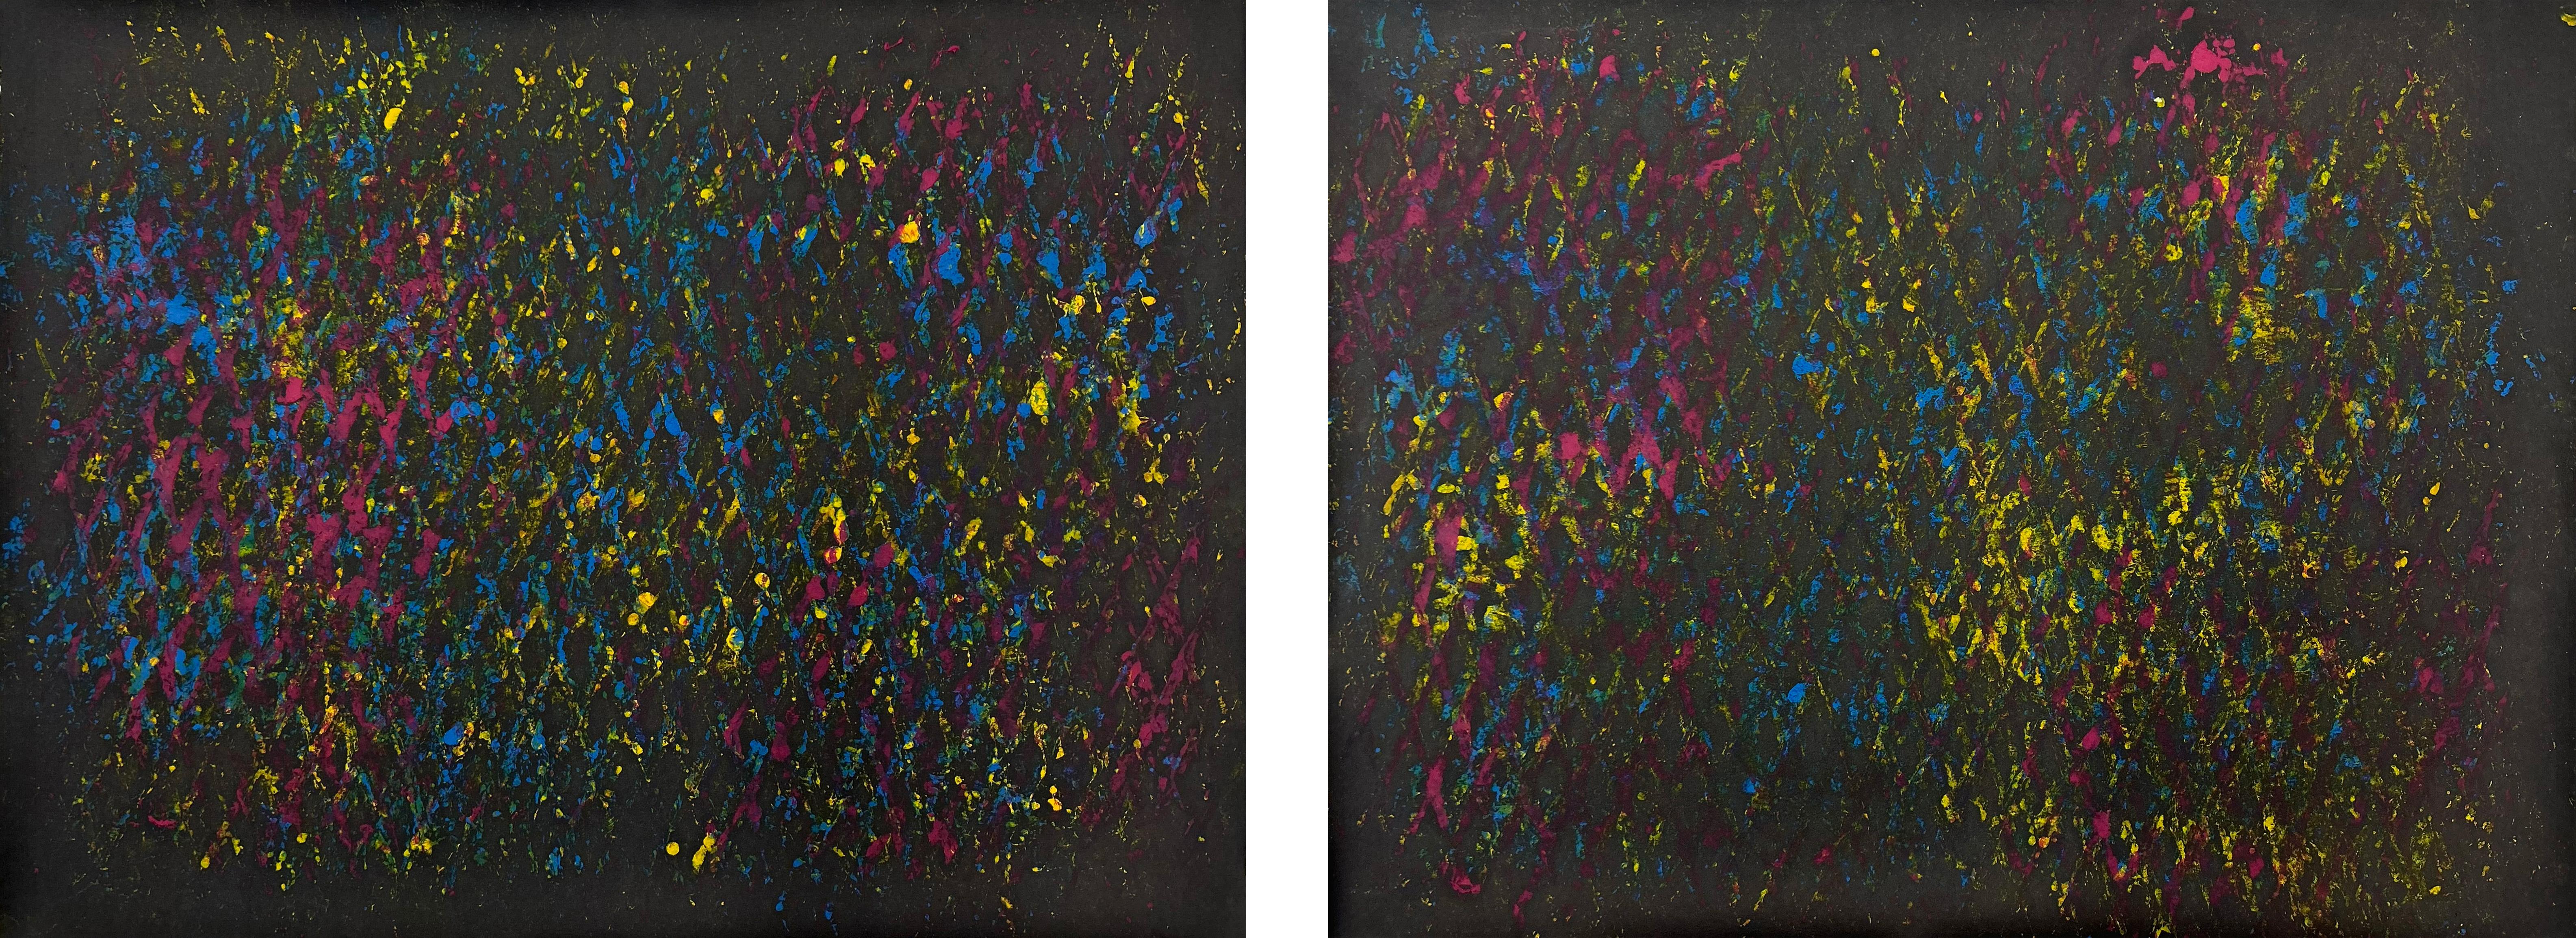 Clemens Wolf Abstract Painting – CMYK I und II, Expanded Metal Painting. Diptychon